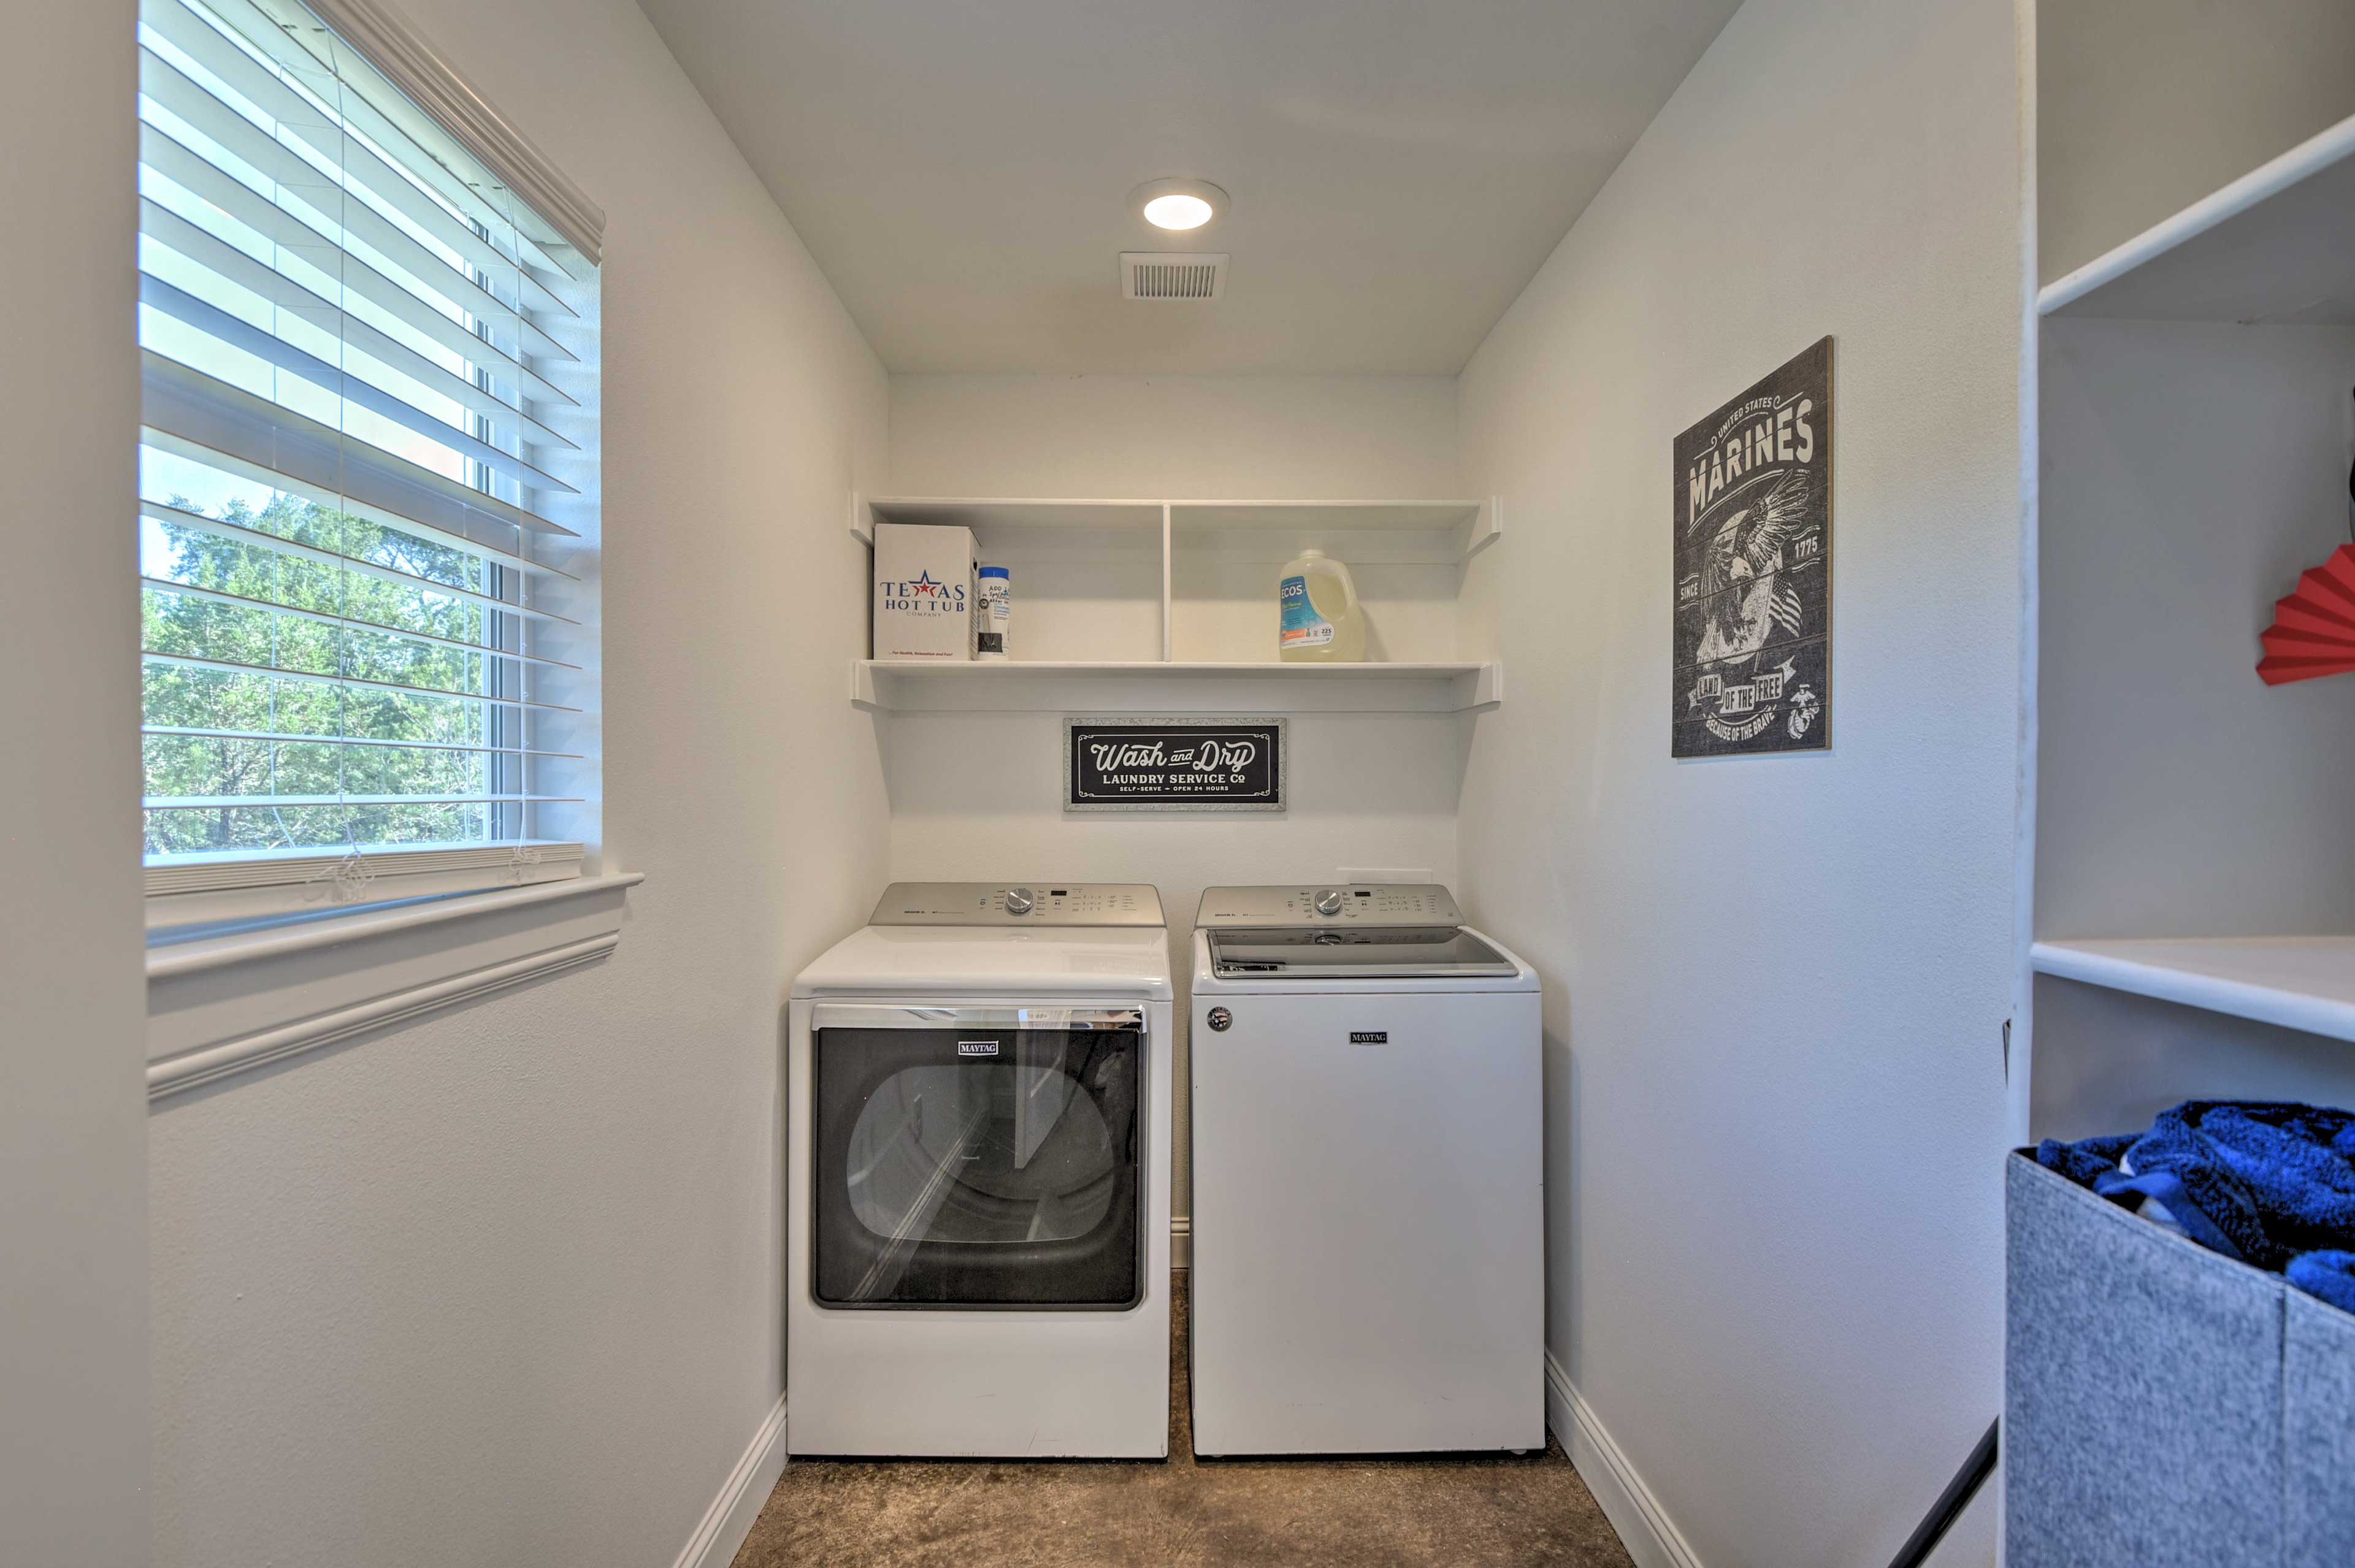 Laundry Room | Laundry Detergent Provided